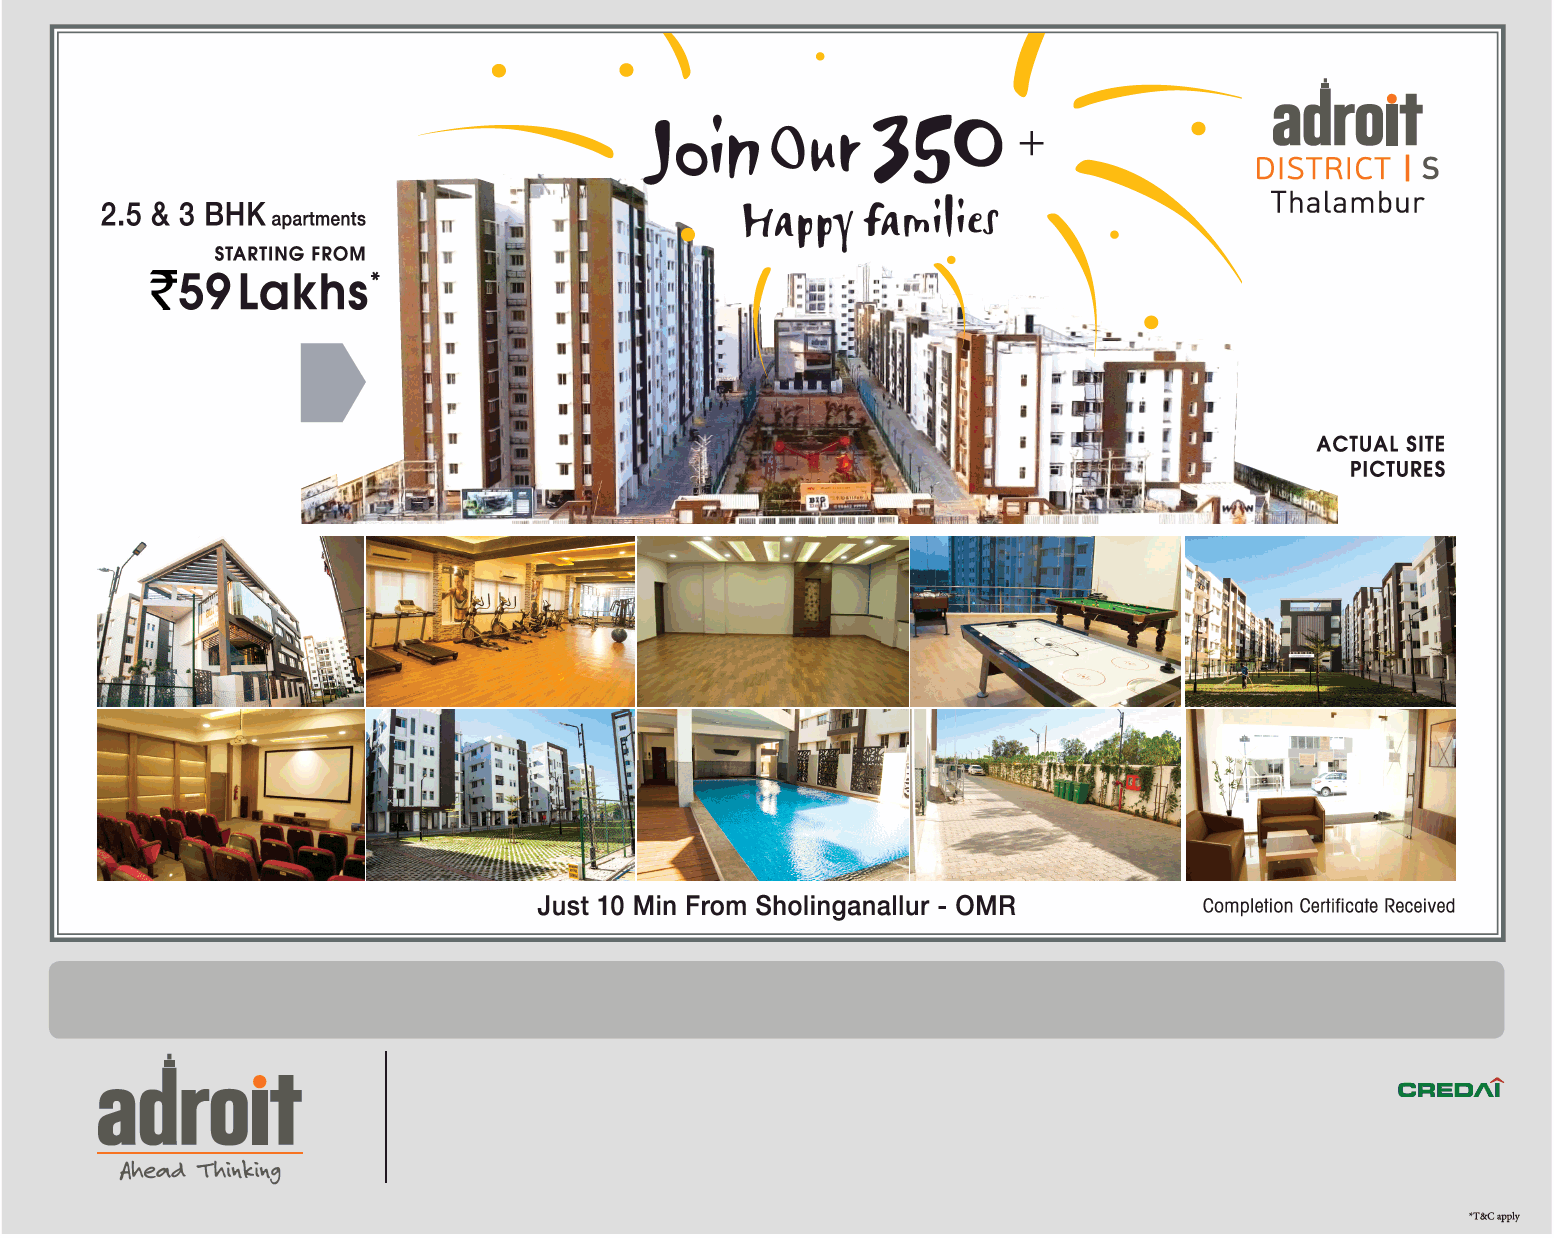 Adroit District S Offer 2.5 and 3 BHK apartments starting from Rs 59 Lakh in Chennai Update